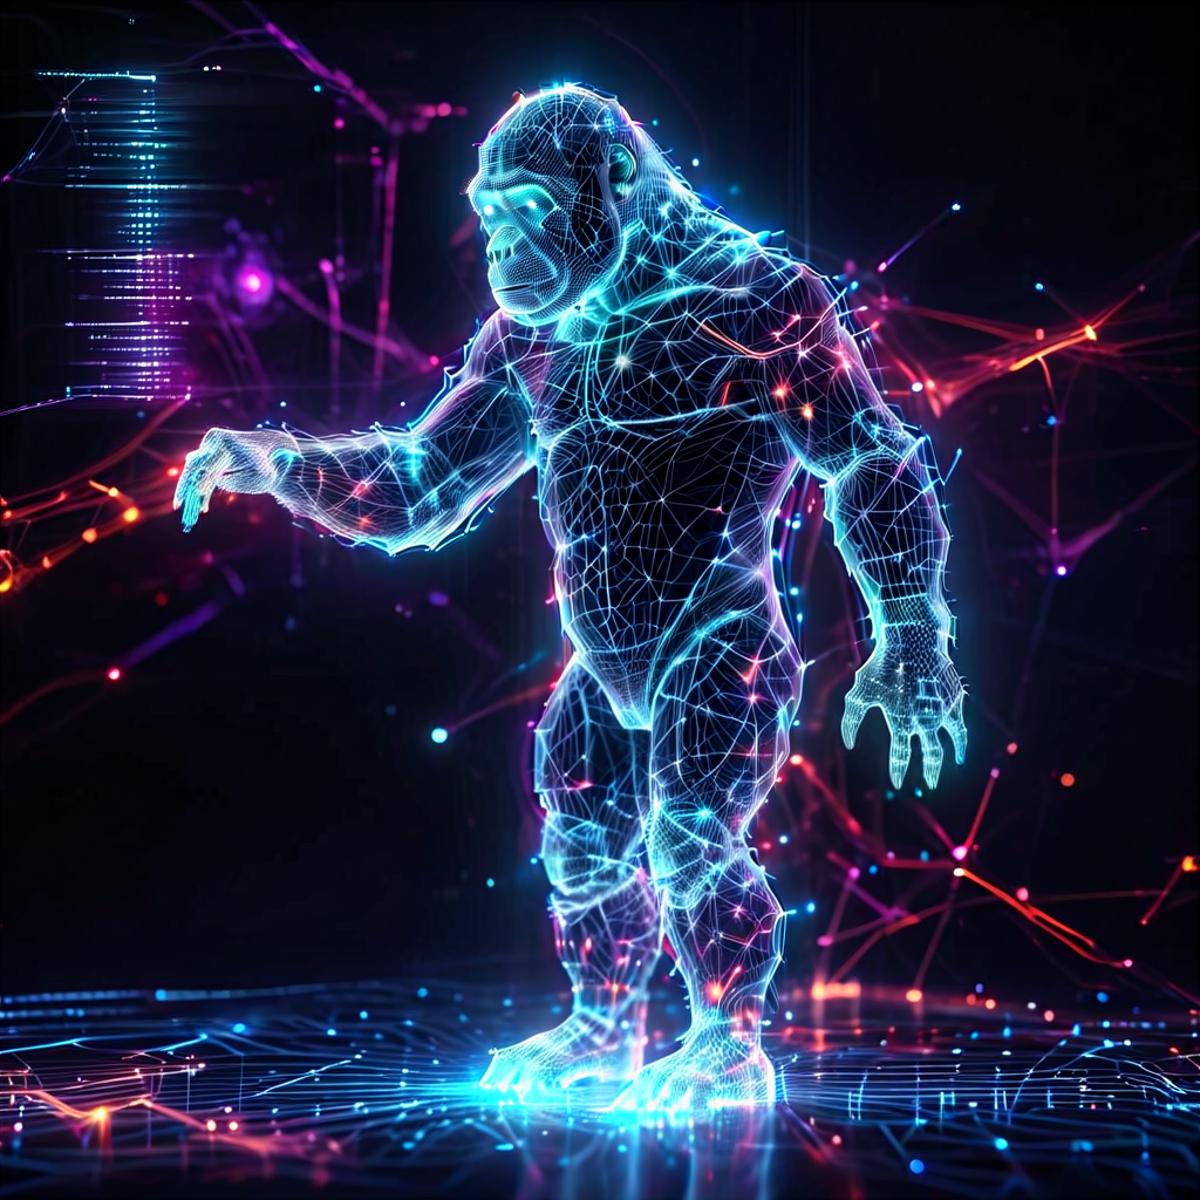 Wireframe Hologram Style XL image by PoetryConnoisseur